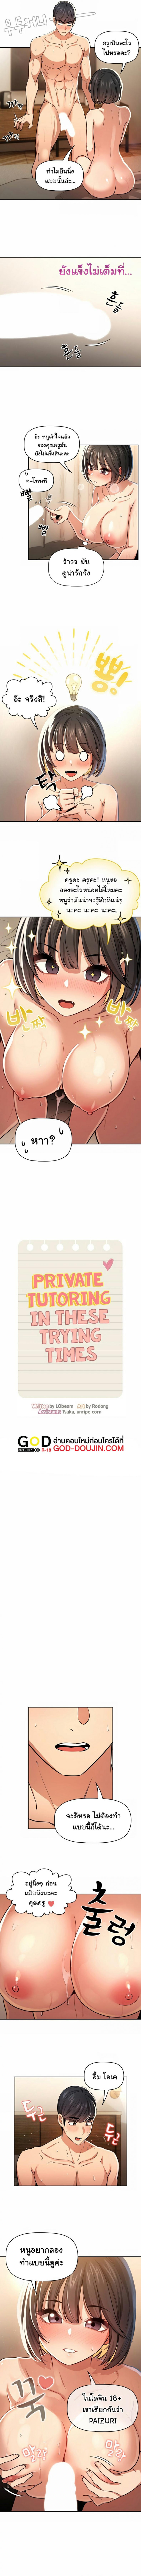 Private Tutoring in These Trying Times 61 (2)